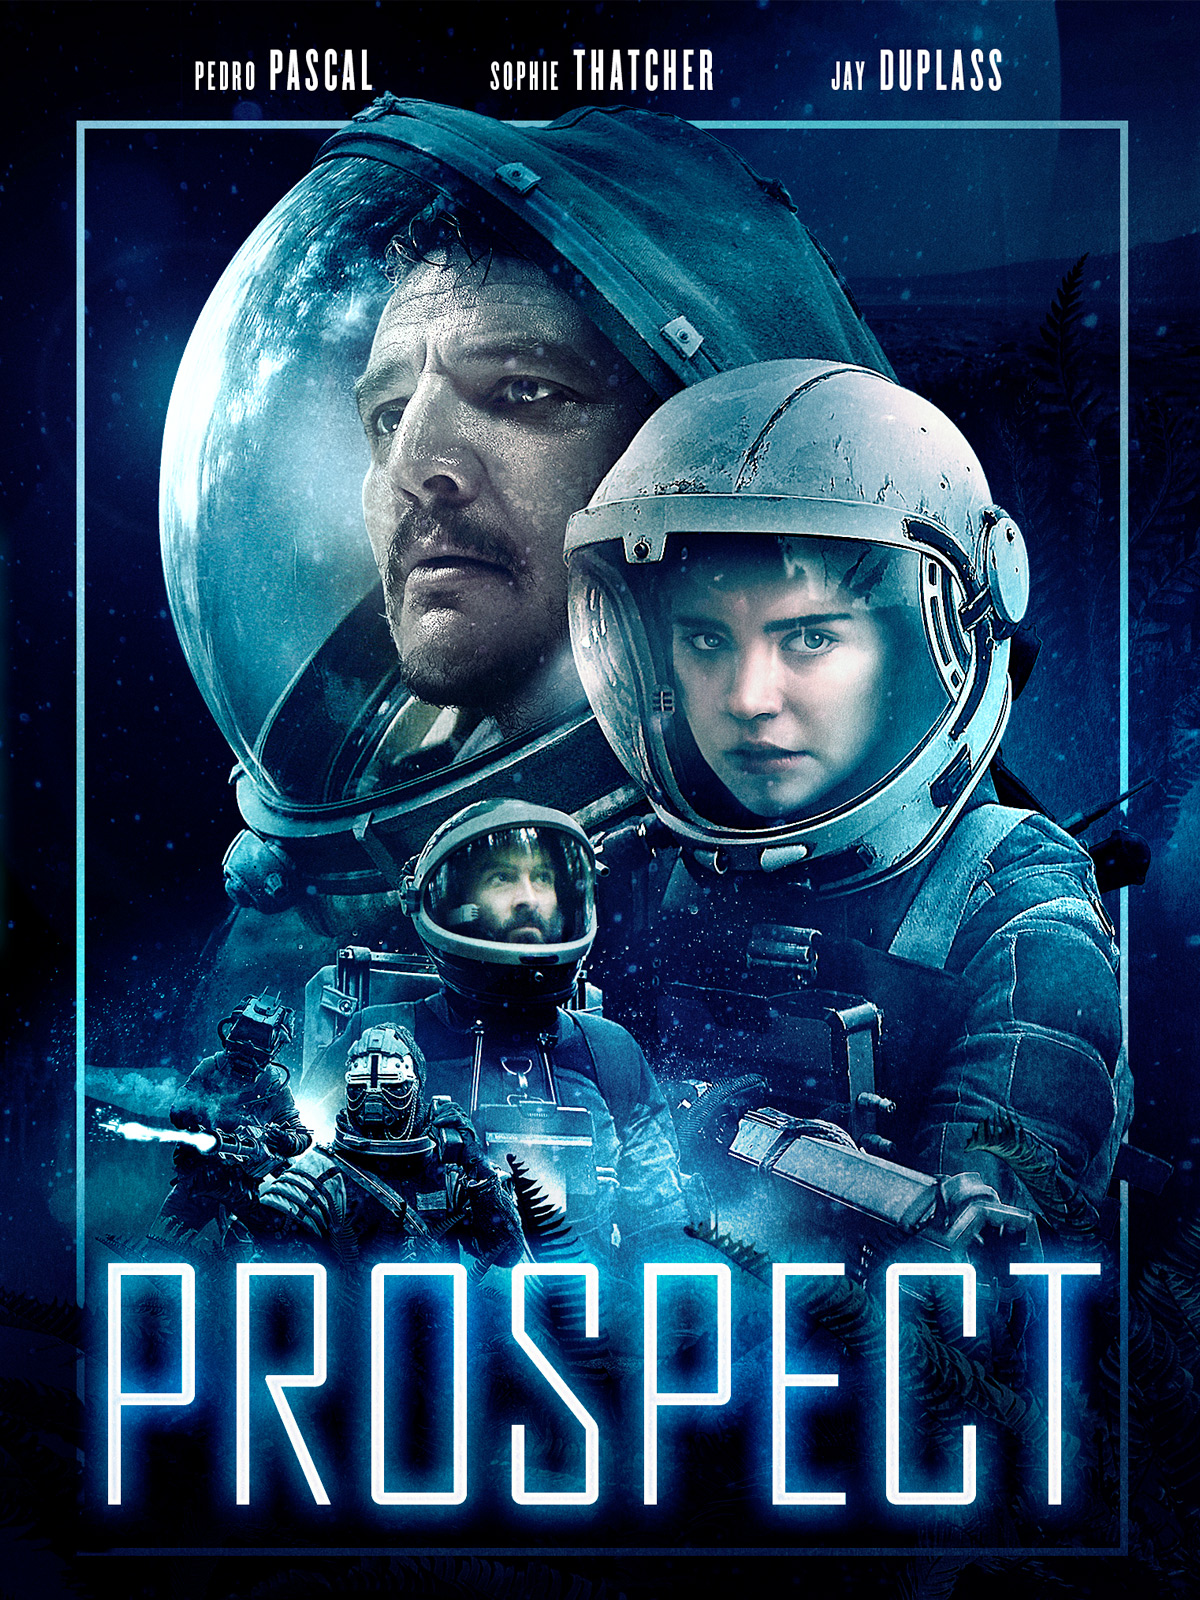 Prospect Blu-ray review: old school sci-fi meets frontier western